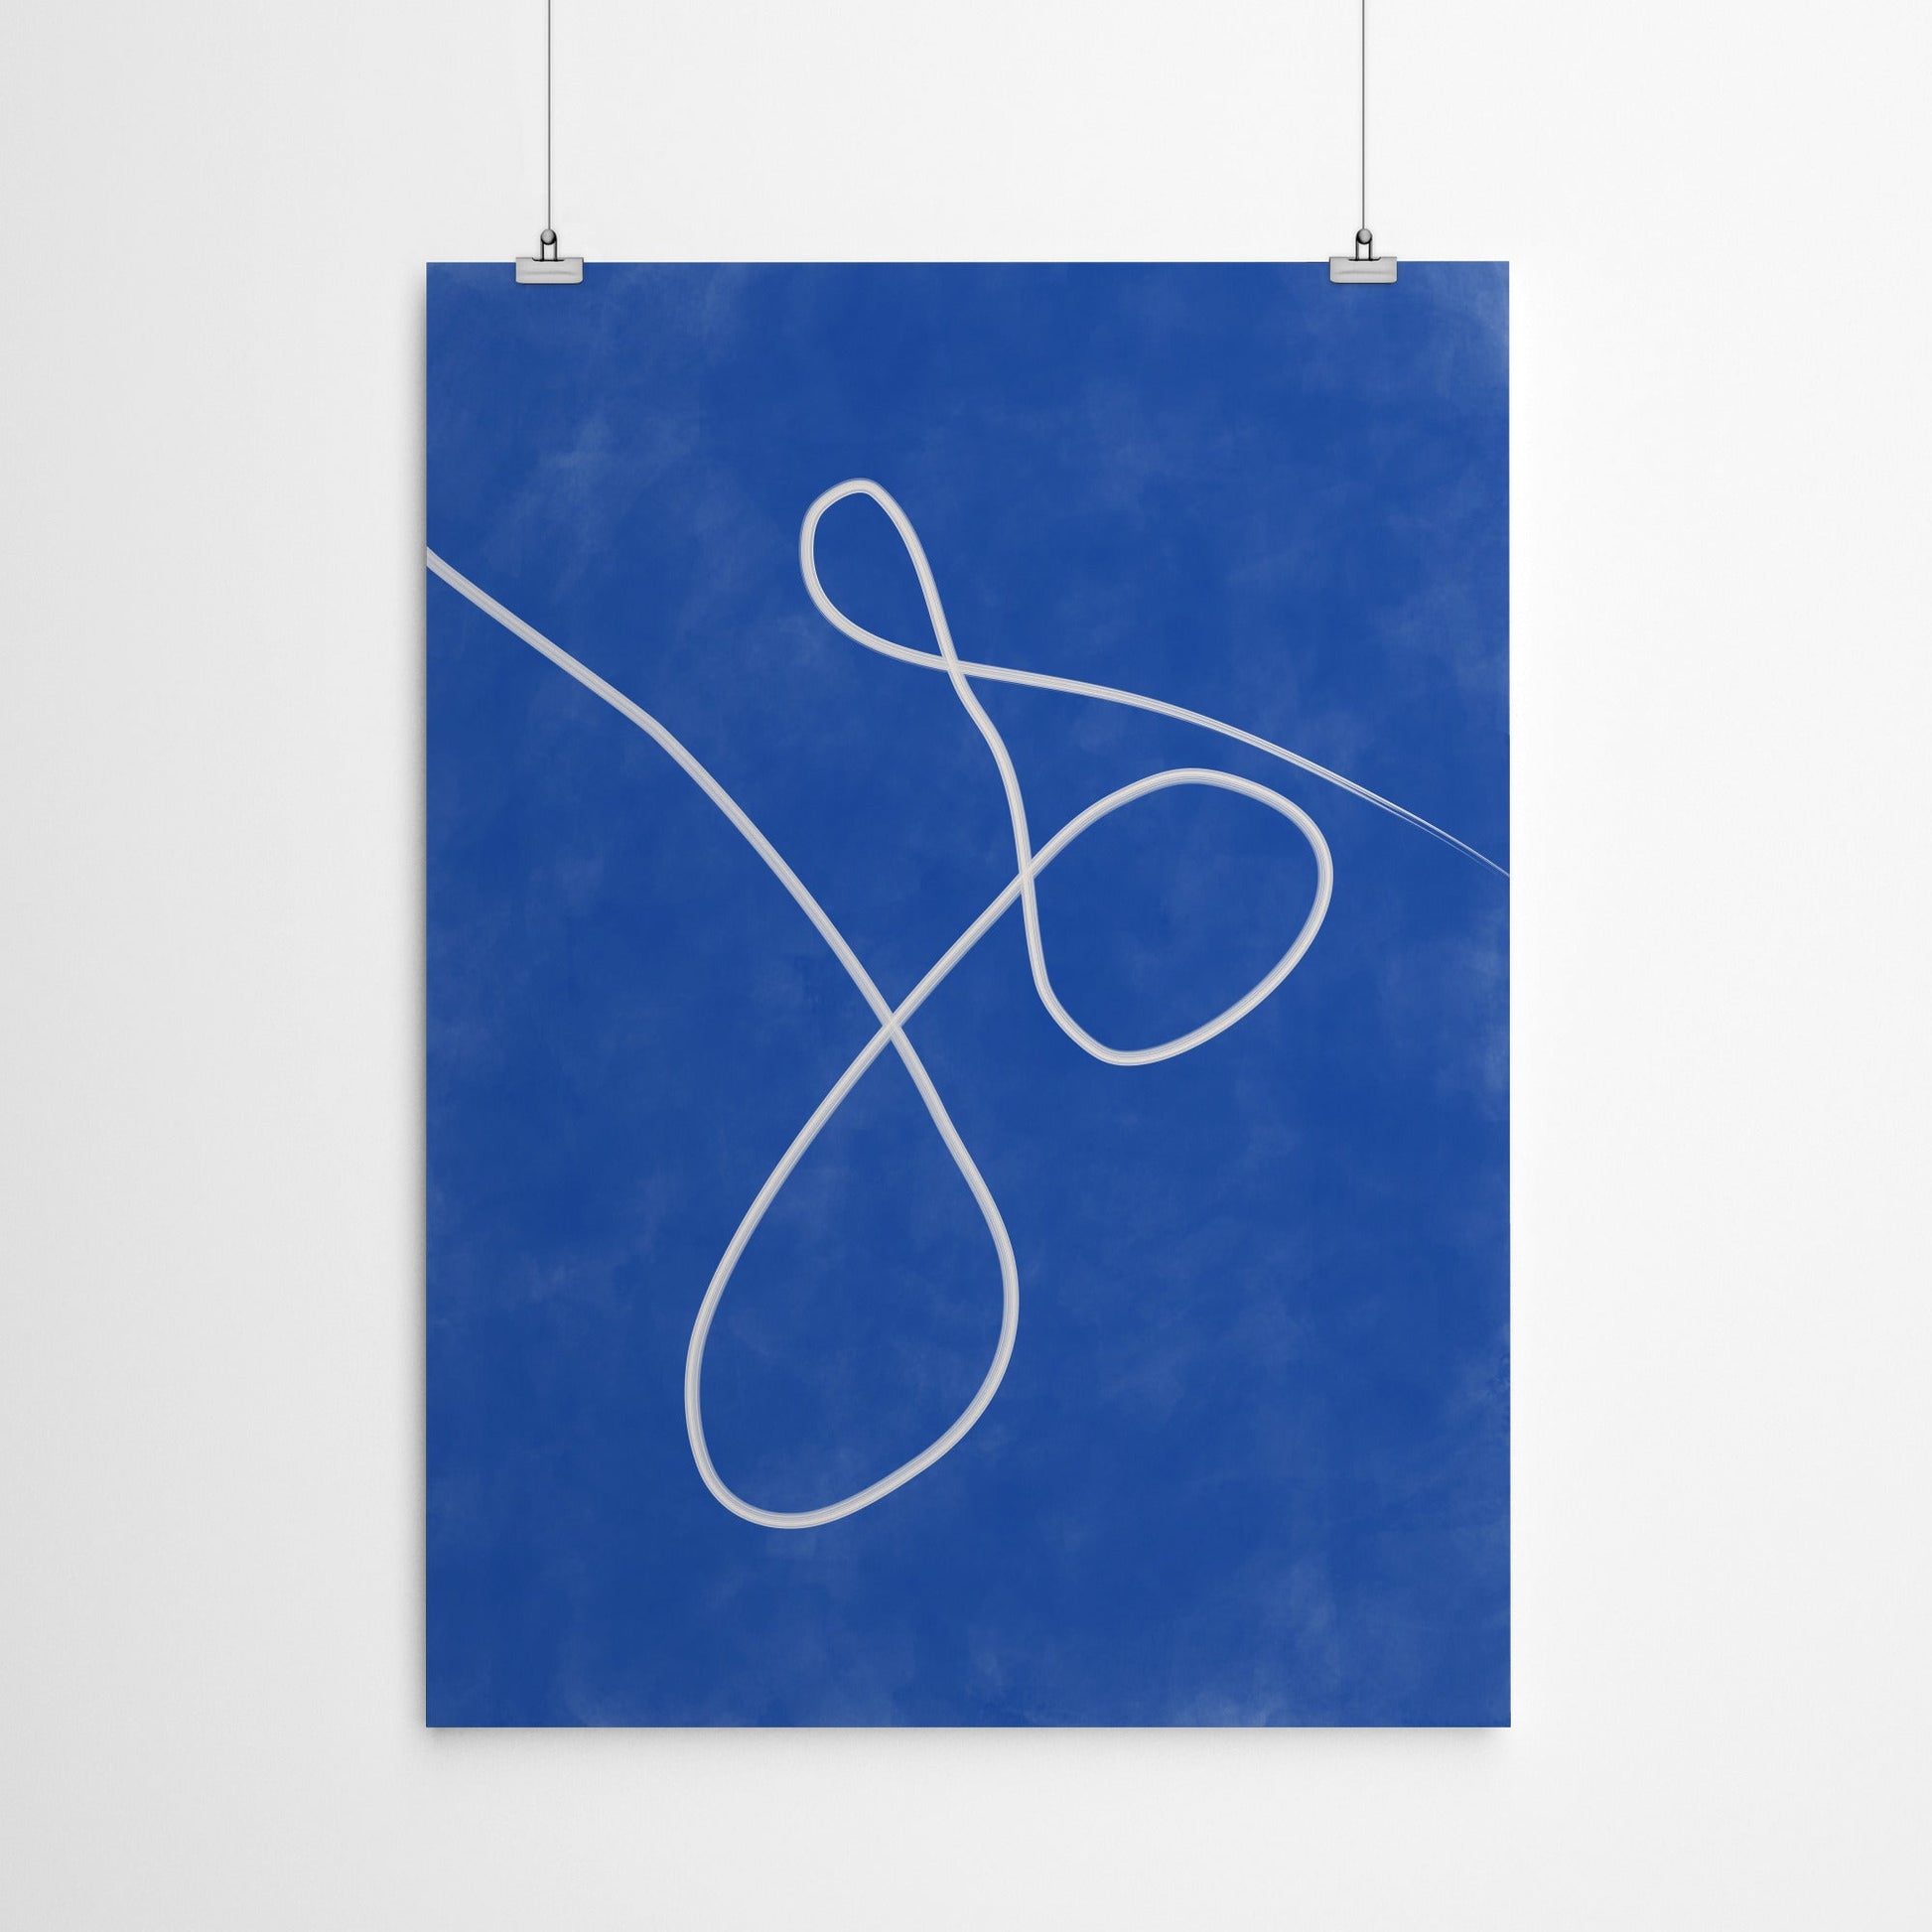 Cobalt Blue Beige Continuous Line Drawing 2 by The Print Republic - Canvas, Poster or Framed Print